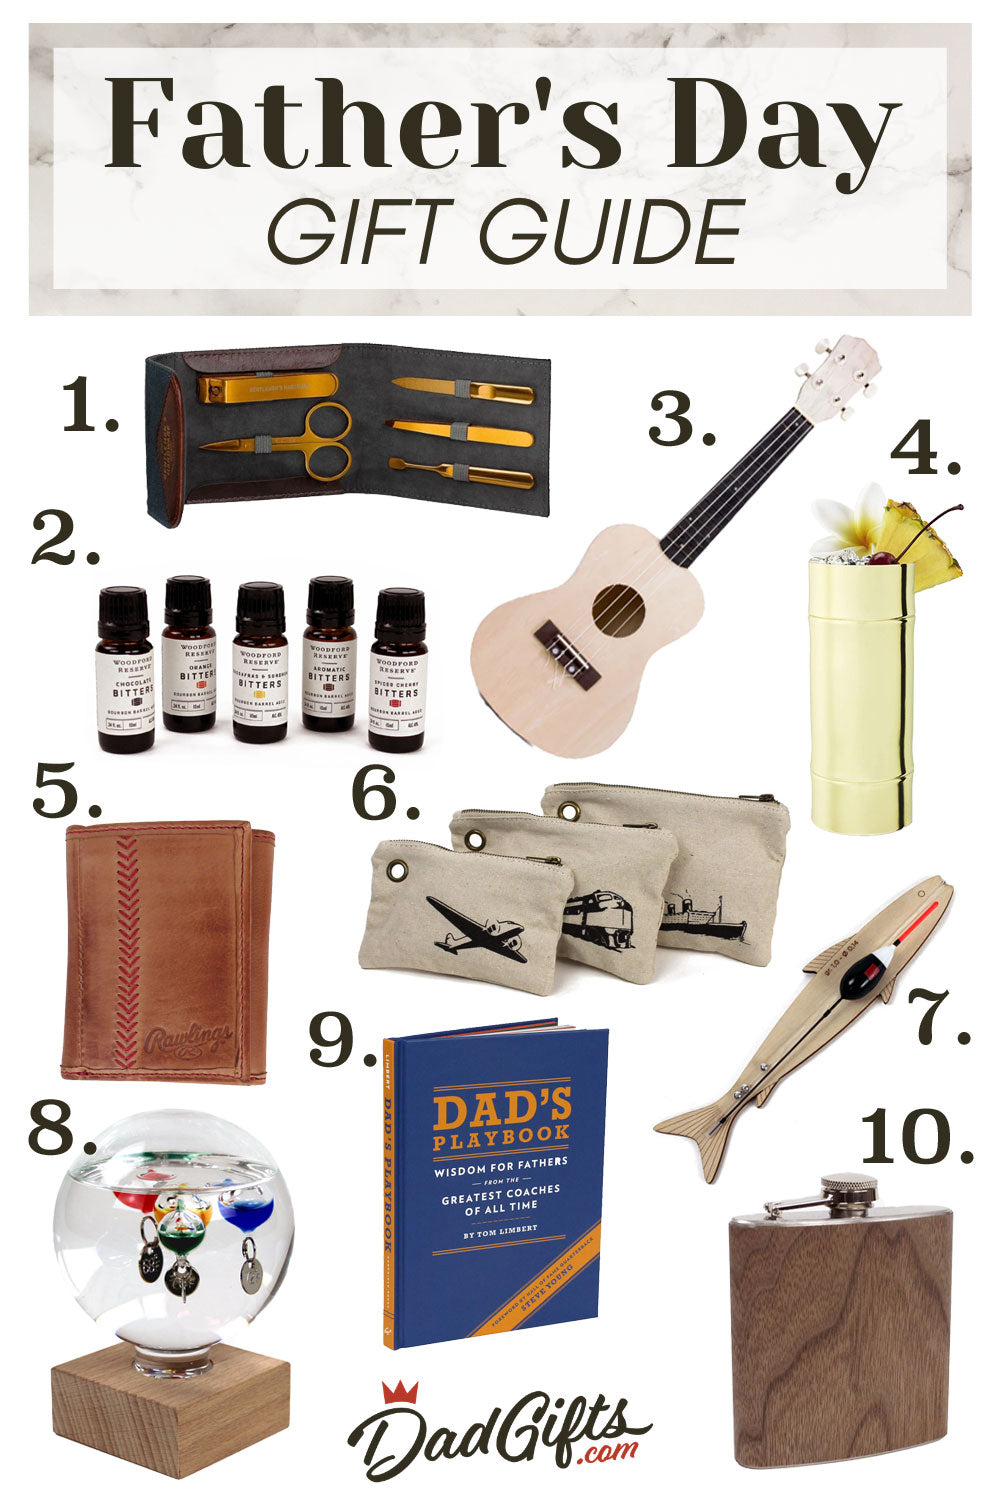 Father's Day Gift Guide: Ten Unique Gift Ideas for Dad!